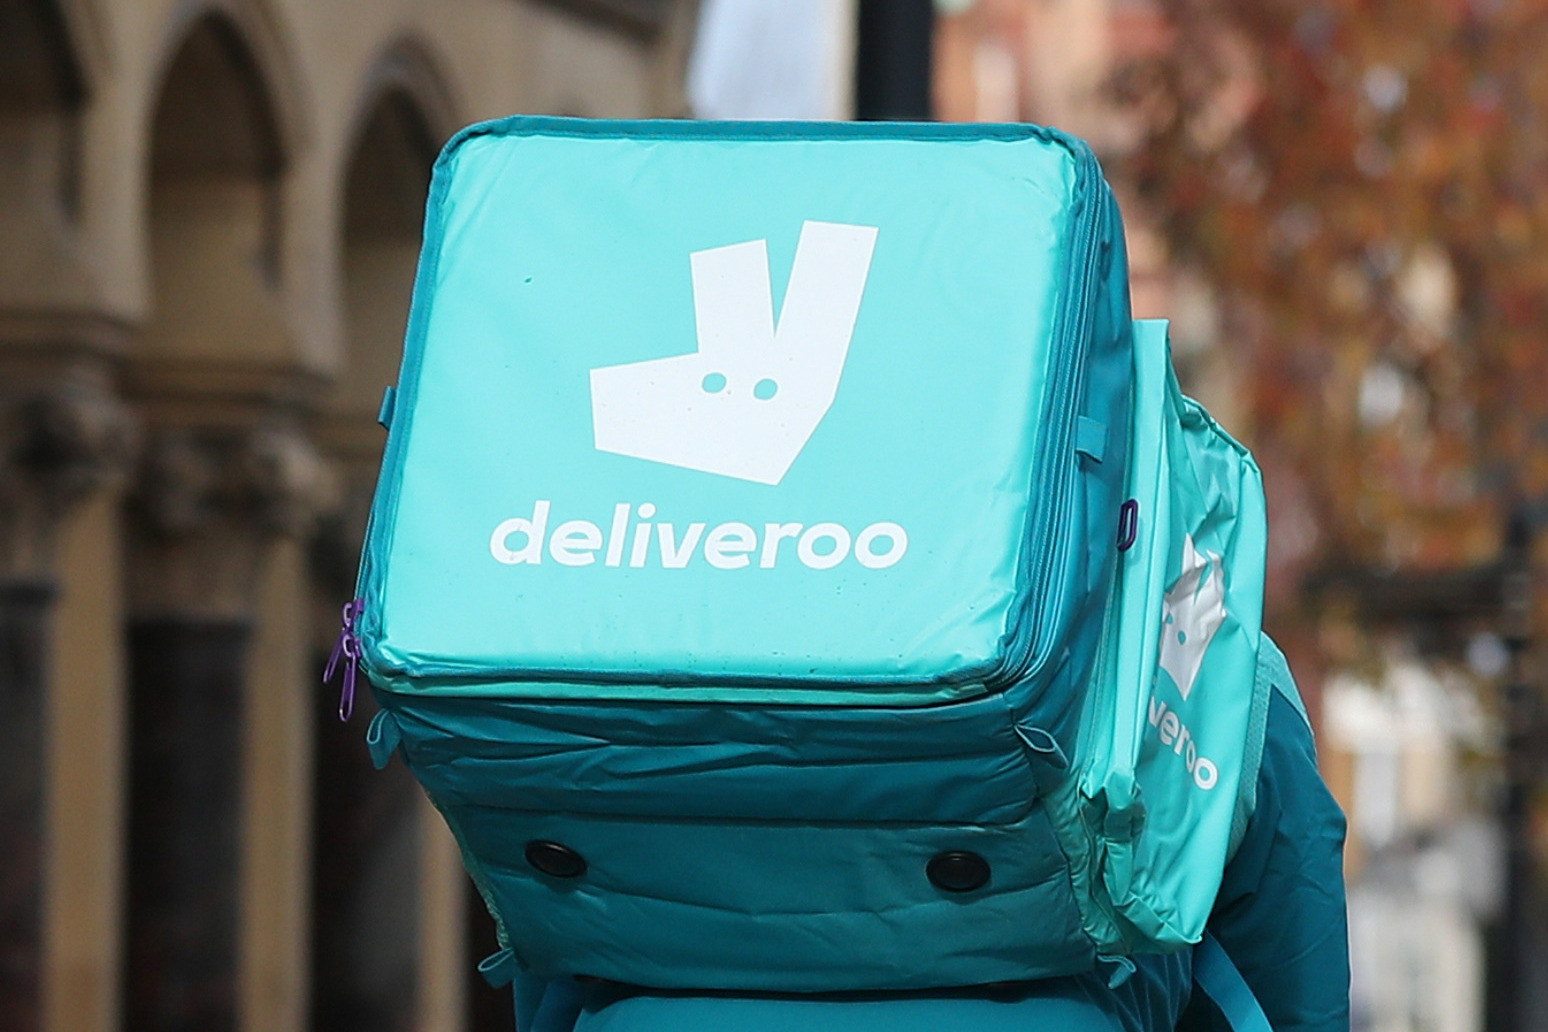 Deliveroo takes to the high street with New Oxford Street store 